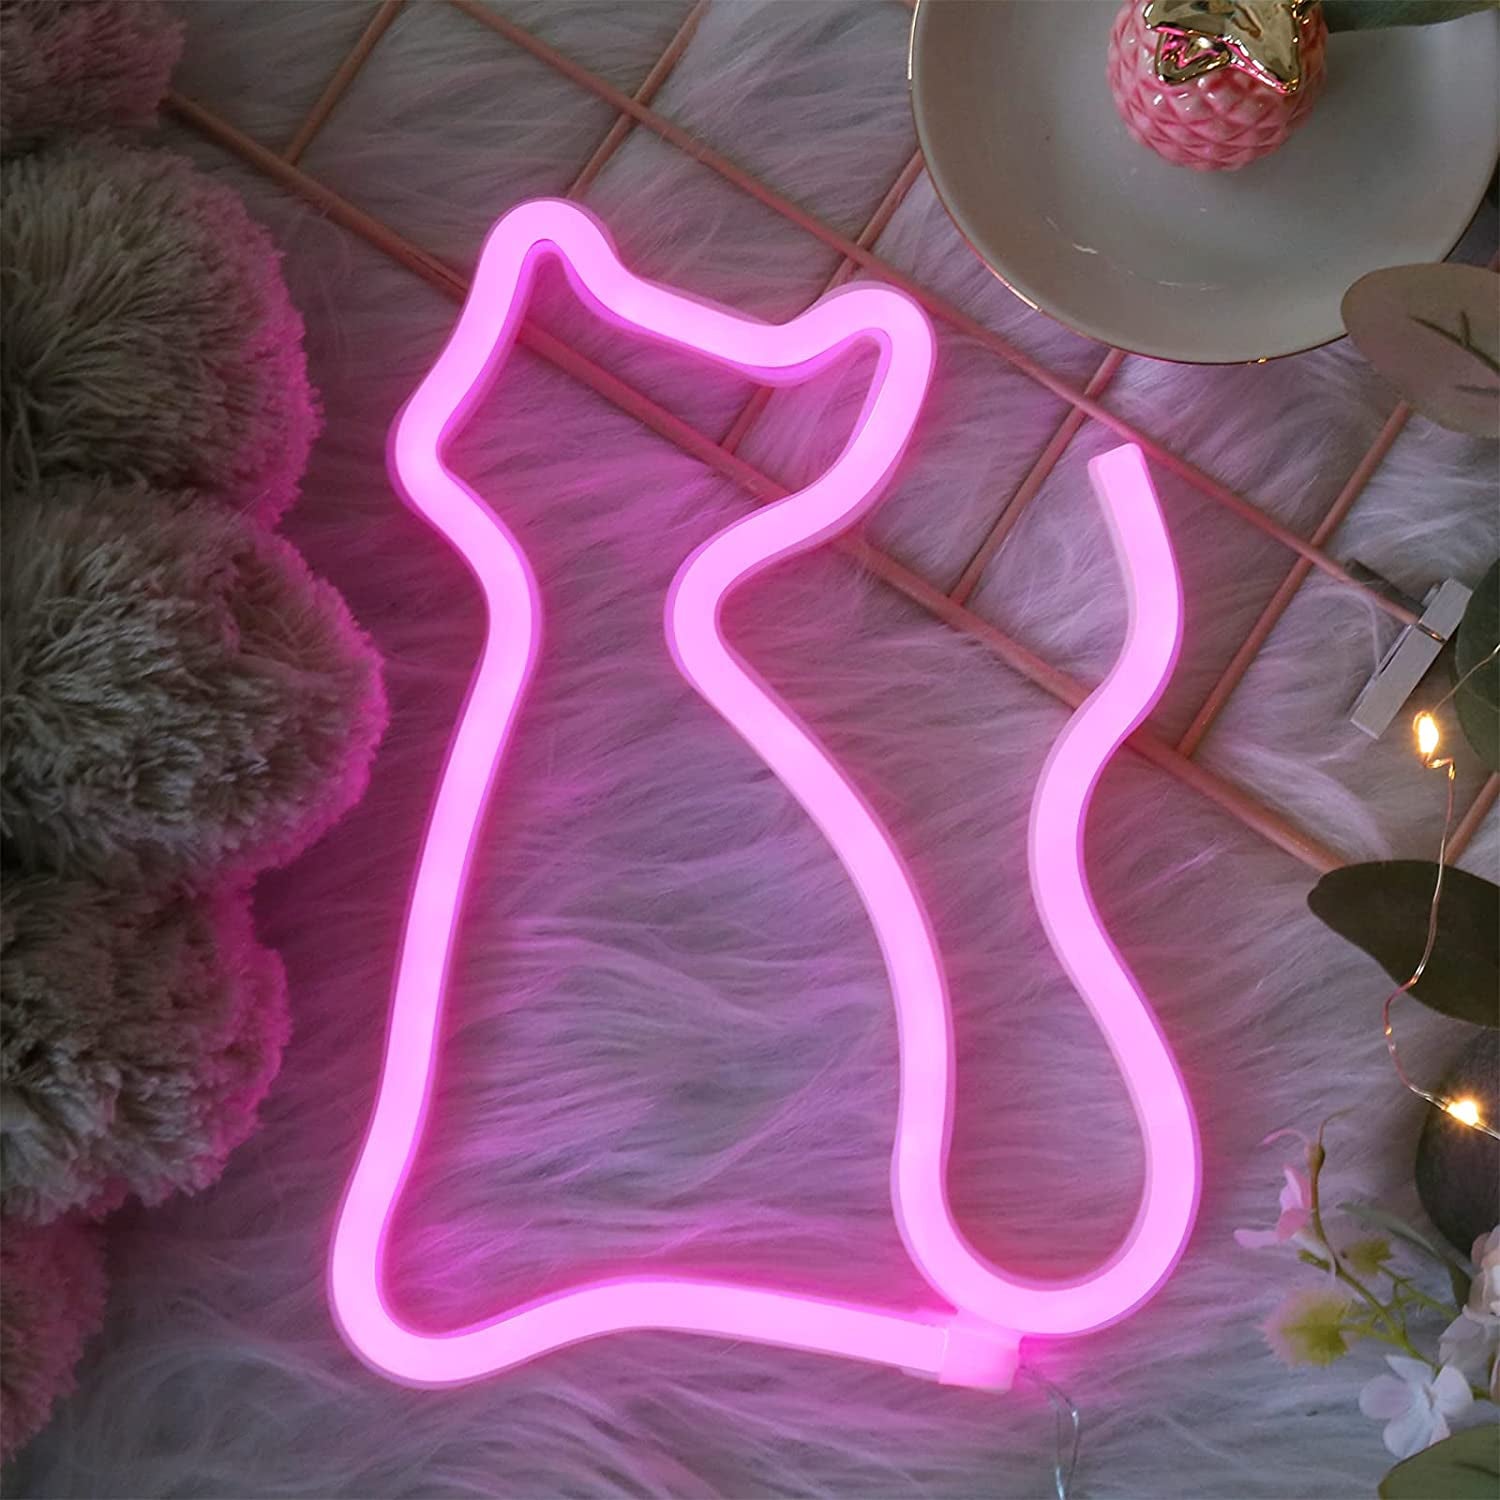 Pink LED Cat Neon Wall Lights - Battery or USB Operated Room Decor, Ideal Cat Lover Gifts